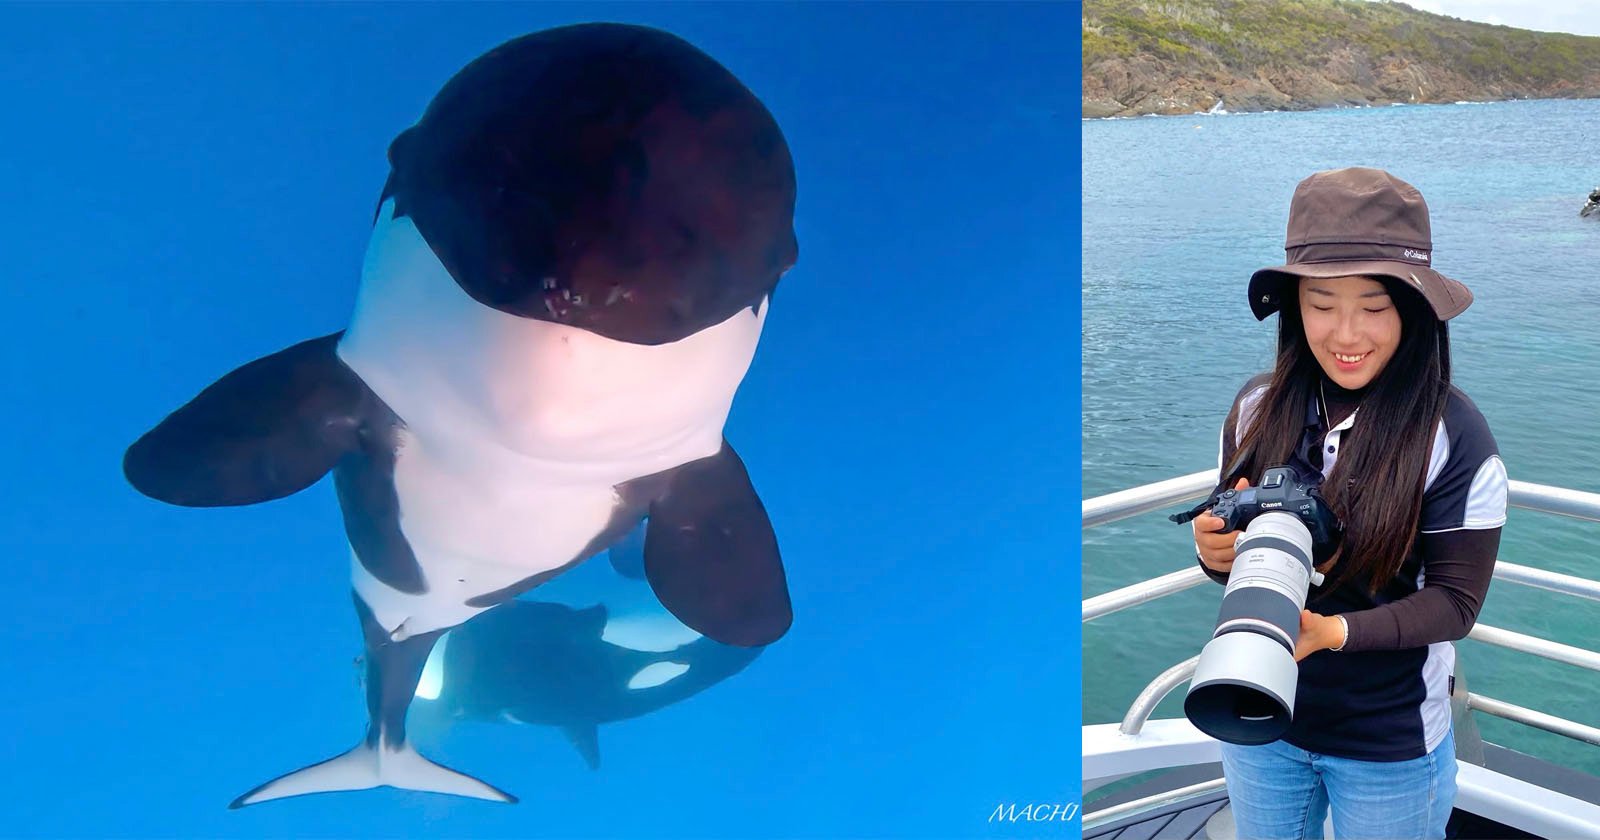 Split image with a close-up of a killer whale underwater on the left and a smiling woman with a camera on a boat on the right, with a coastal background.